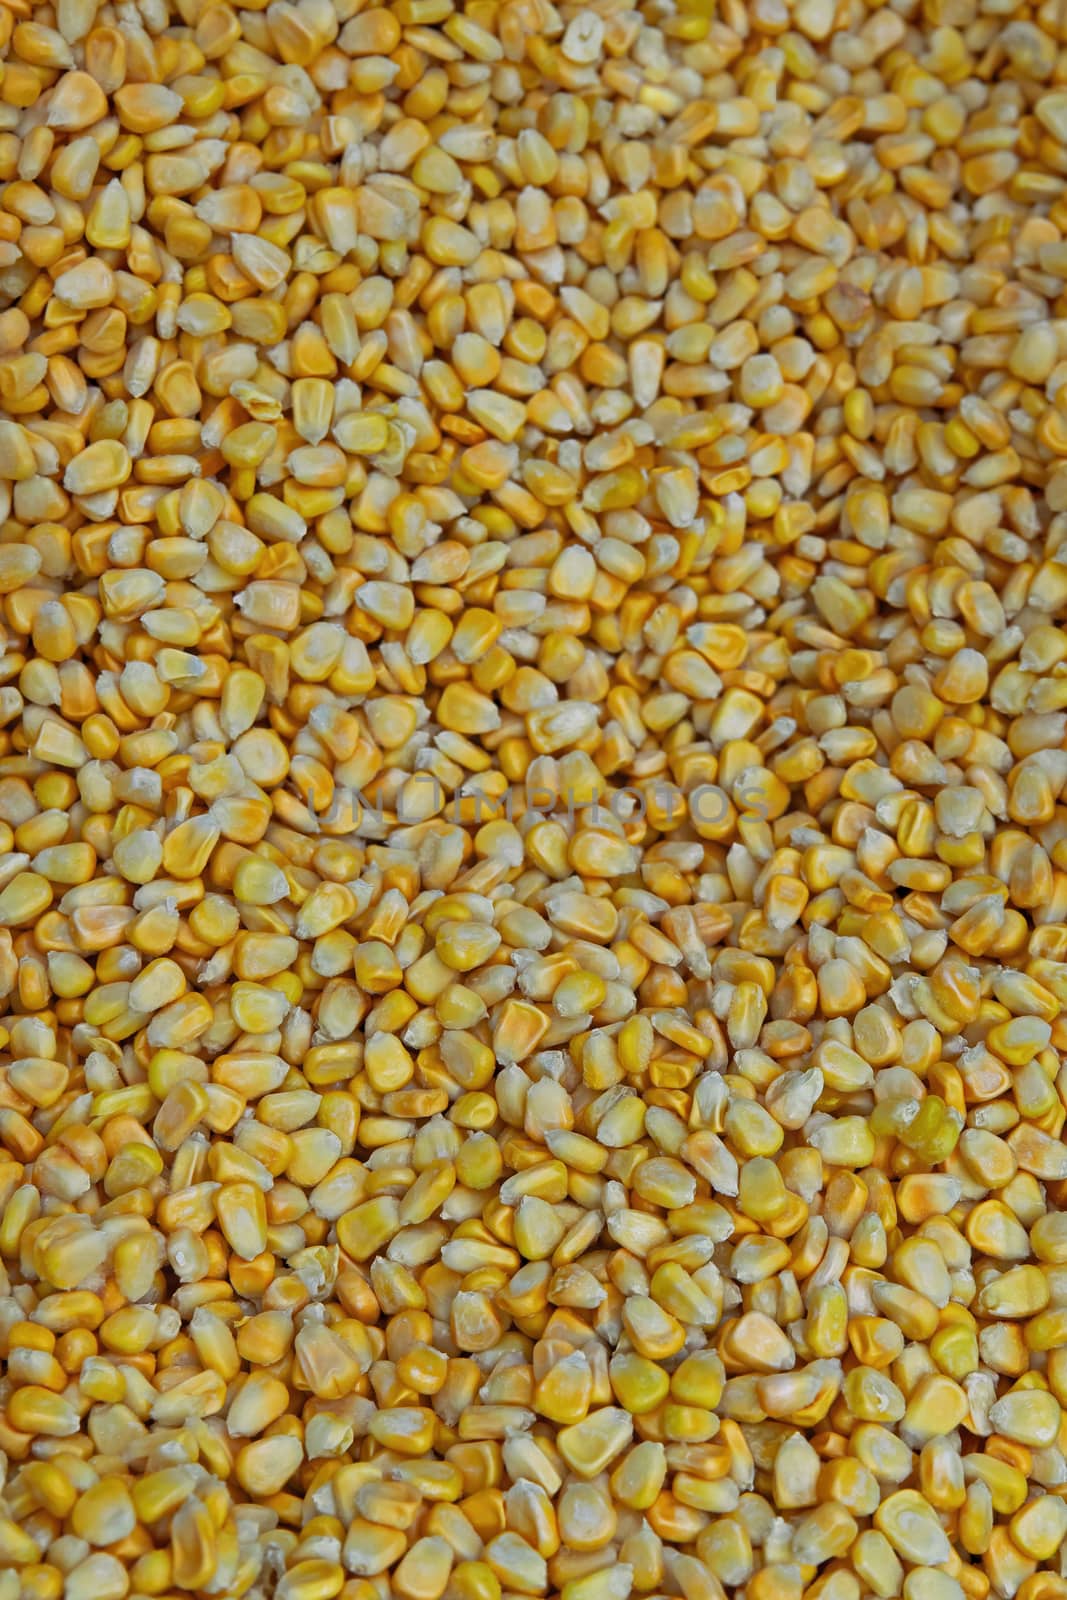 Ripe yellow corn kernels are frozen and sold at the grocery store. Natural products that are suitable for fast cooking healthy food.